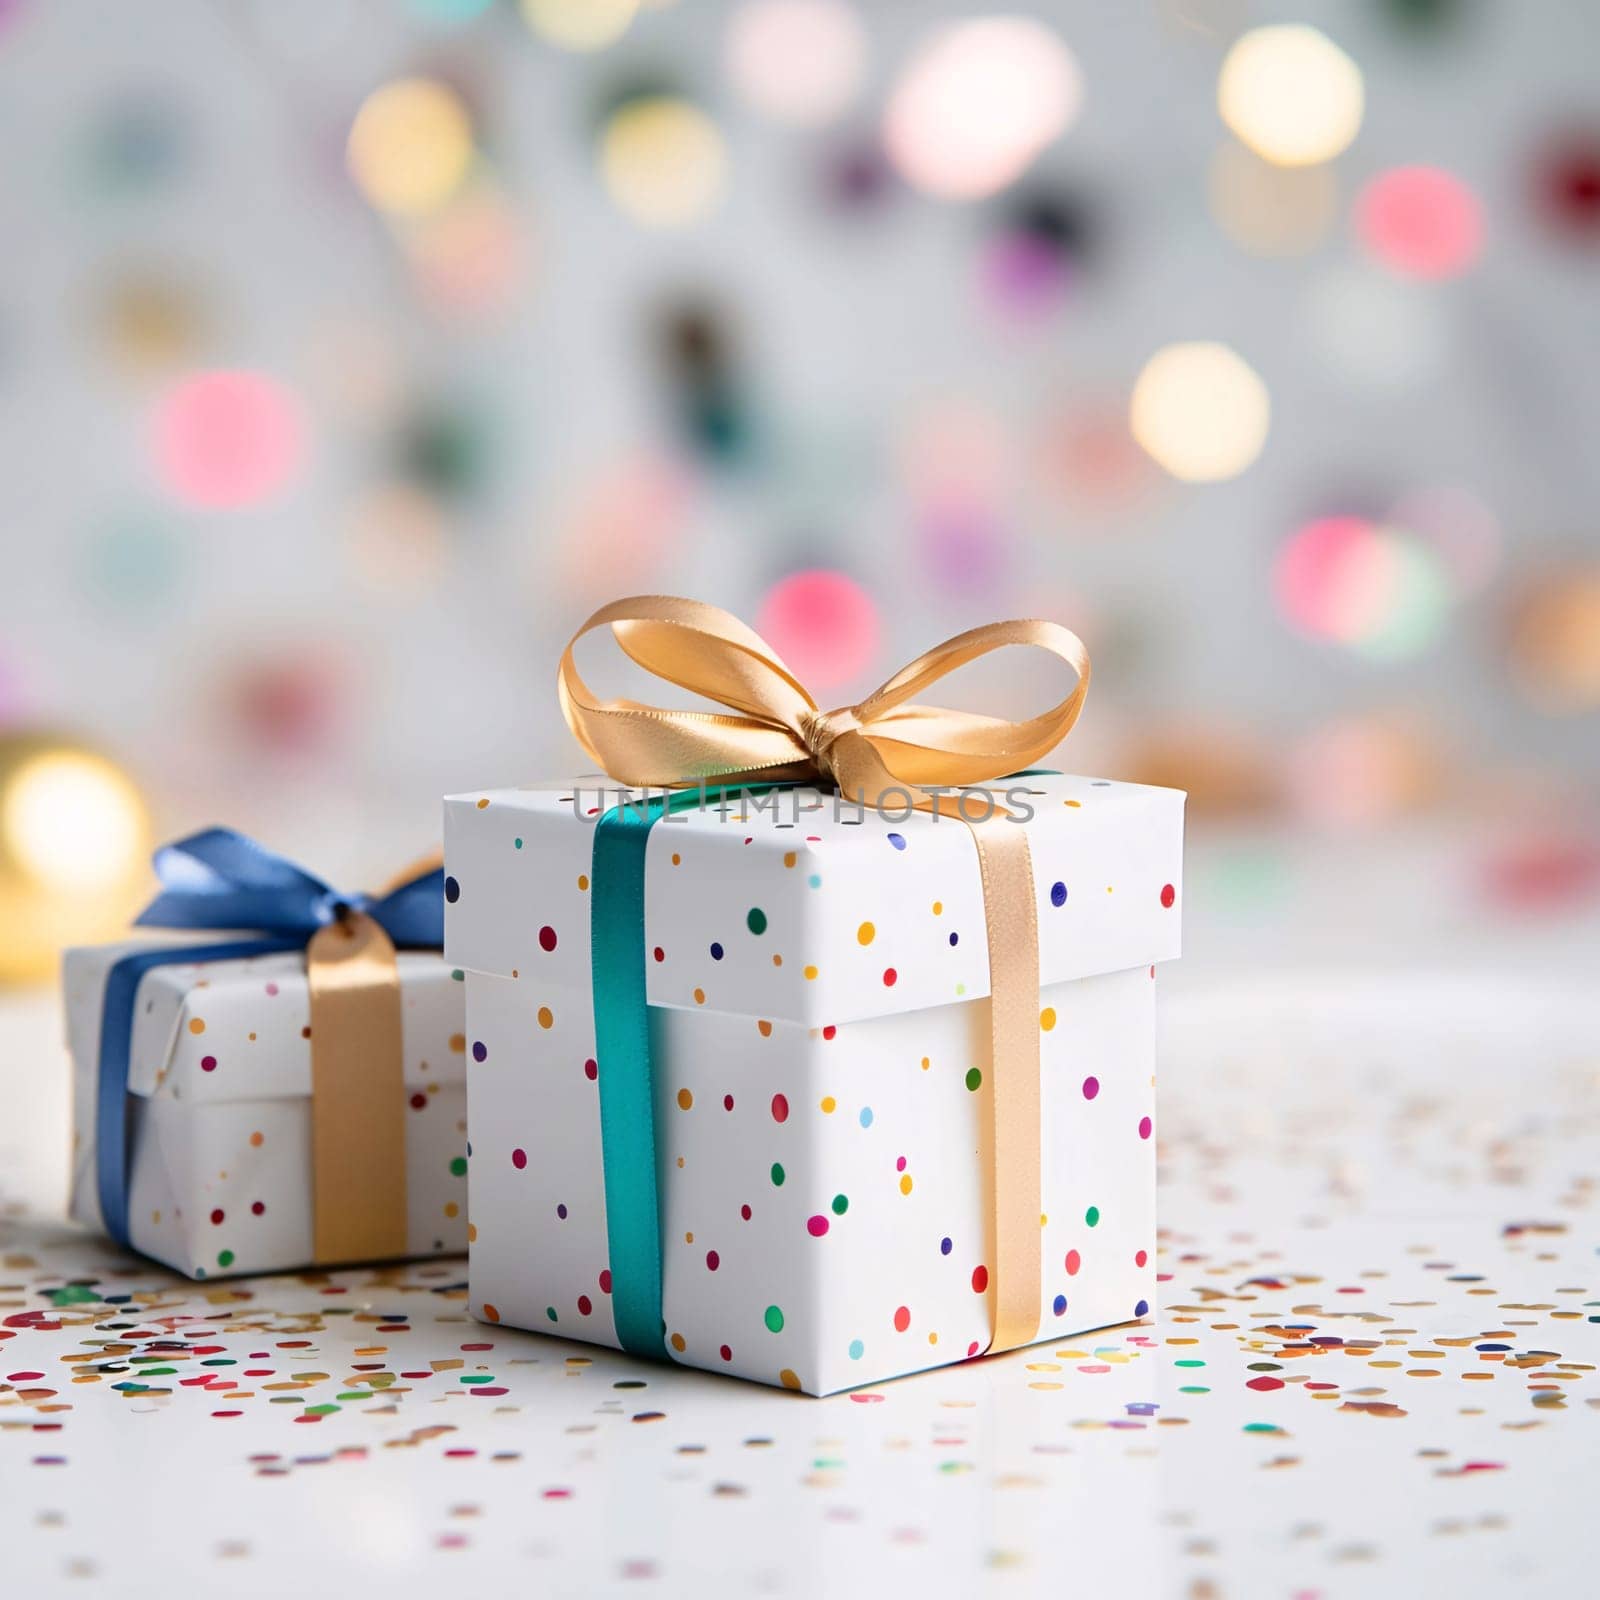 Small white gifts in colorful dots with bows around scattered confetti, smudged background. Gifts as a day symbol of present and love. A time of falling in love and love.